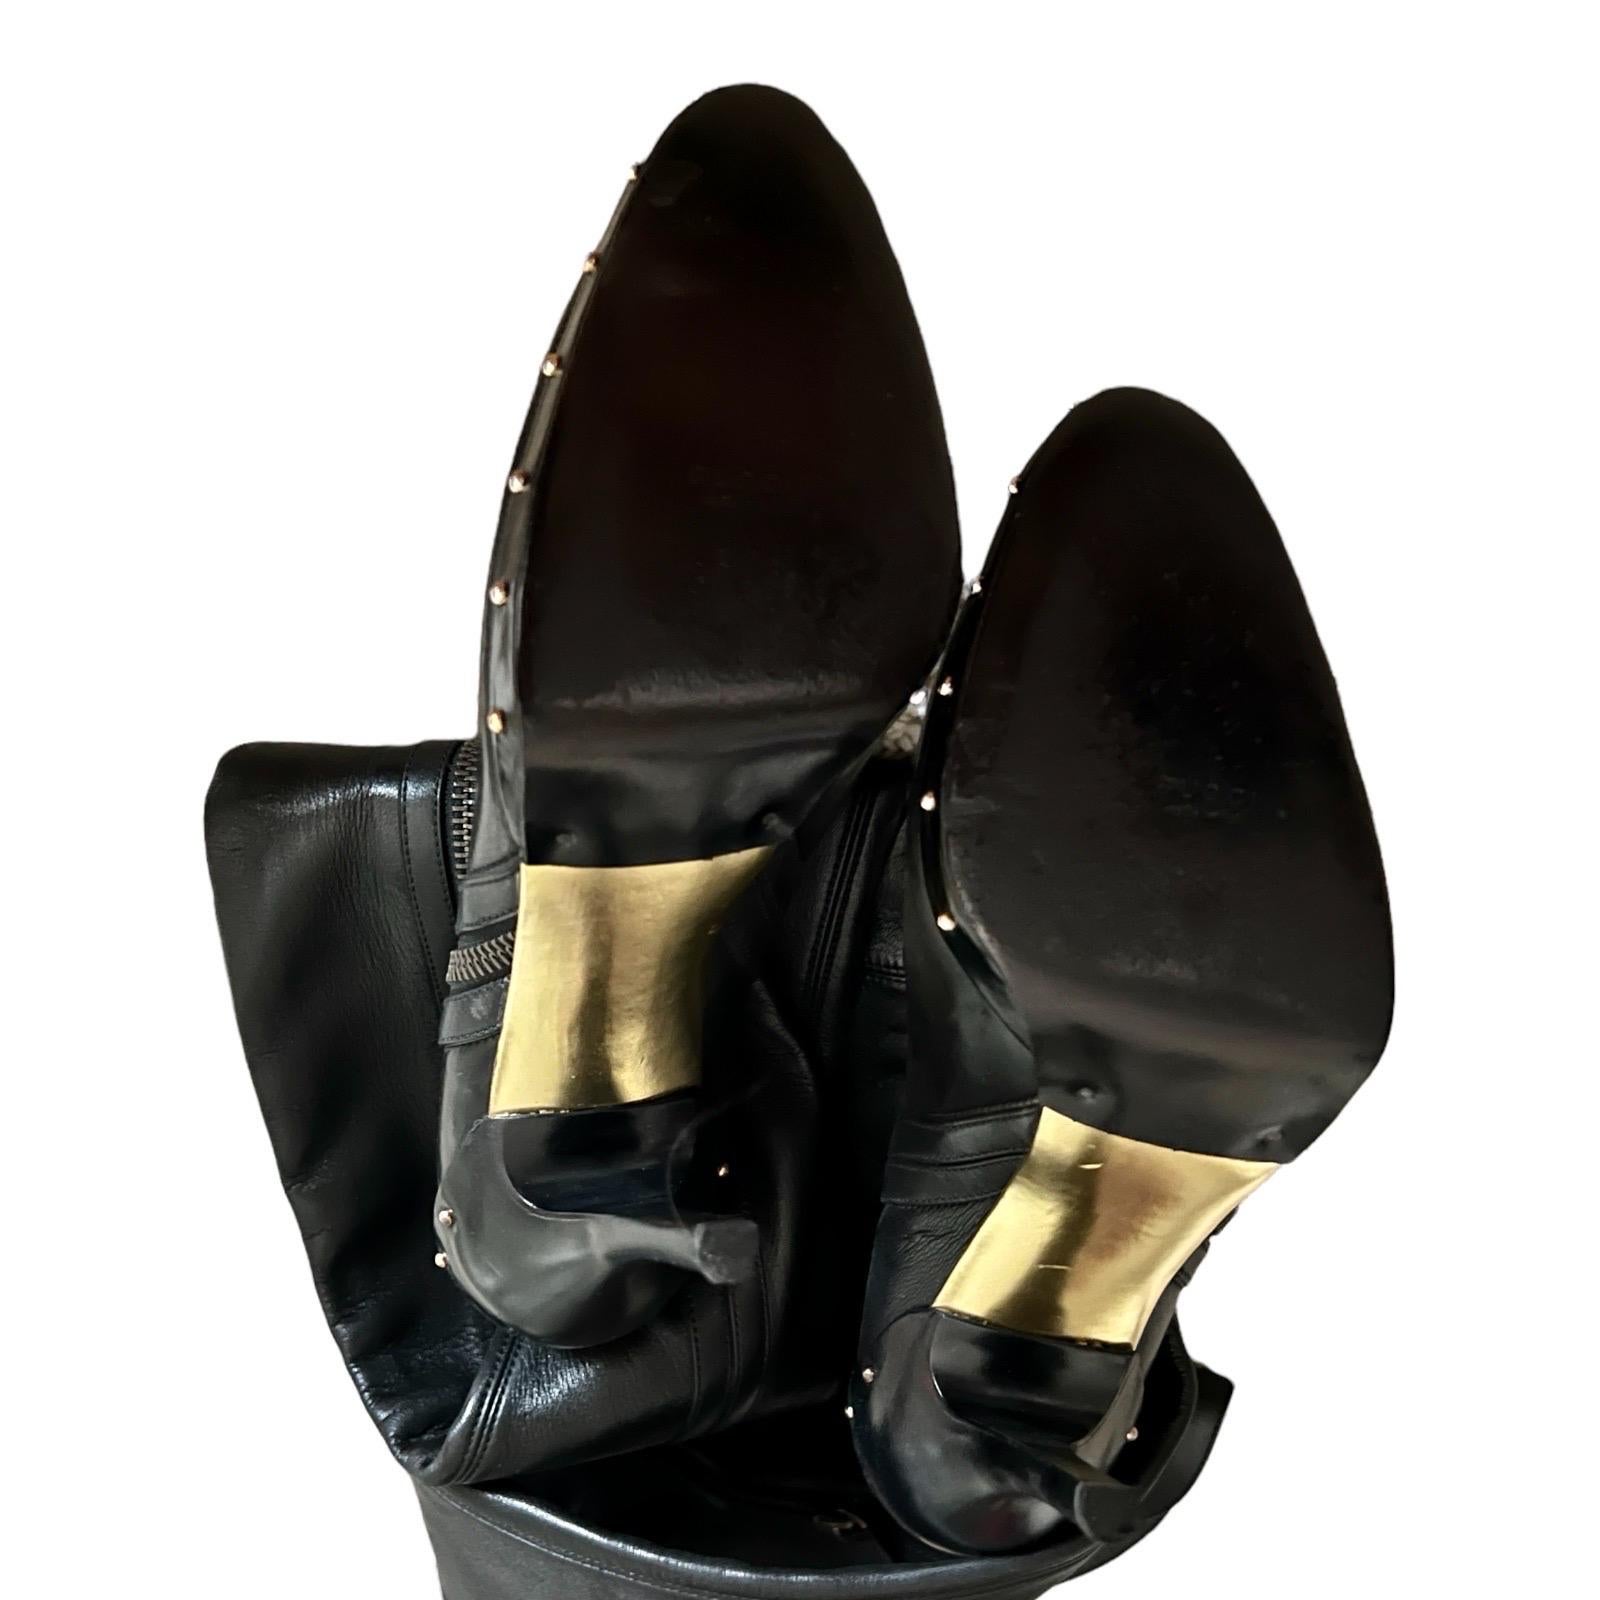 ICONIC Gucci by Tom Ford Black Studded OTK Bondage High Heel Boots 2003 37.5C In Good Condition For Sale In Switzerland, CH